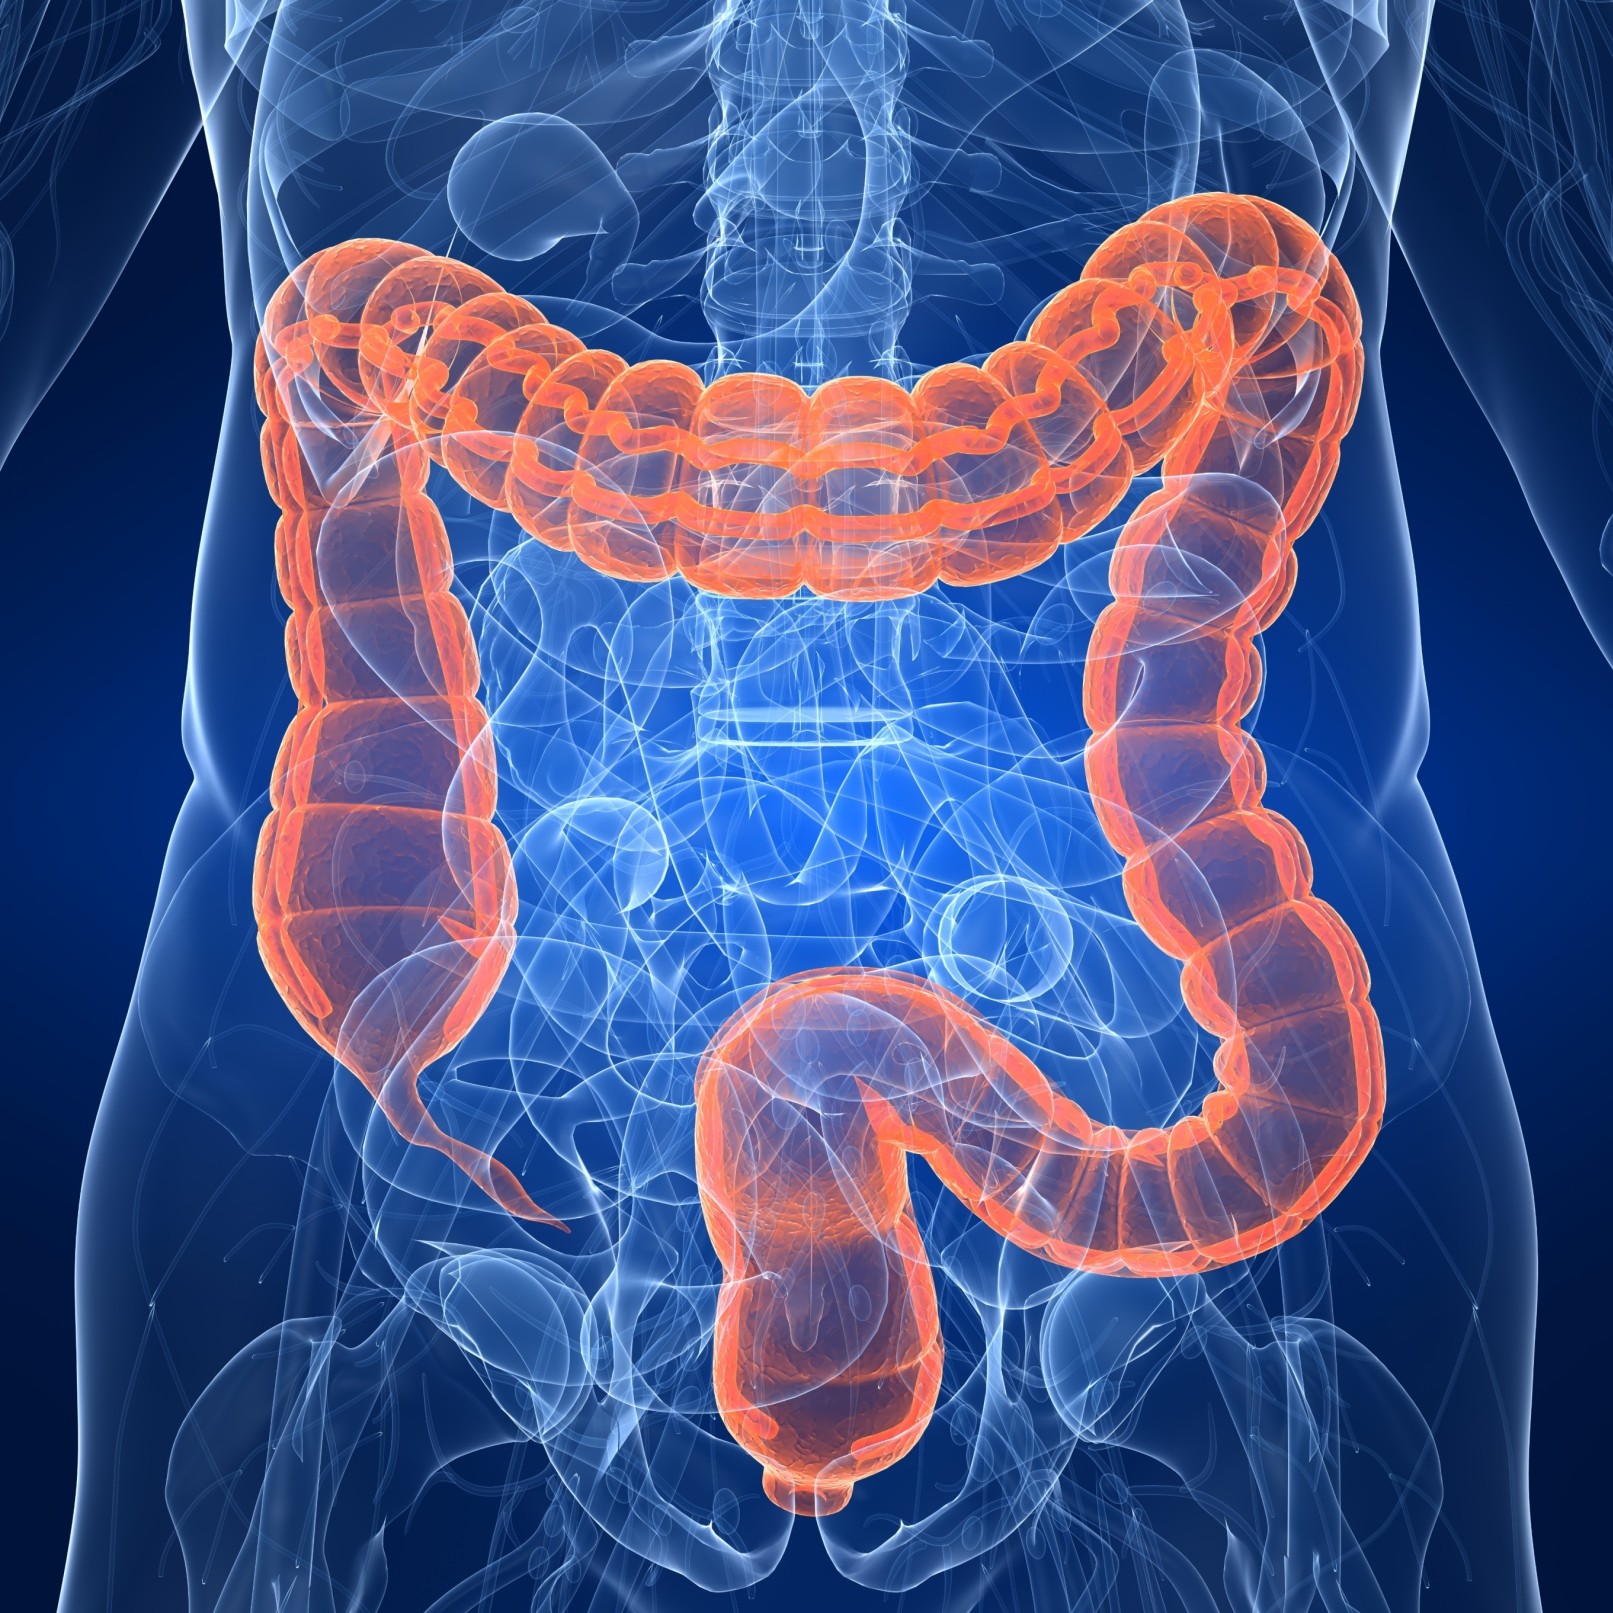 Can Glucosamine and Chondroitin Support a Healthy Colon?